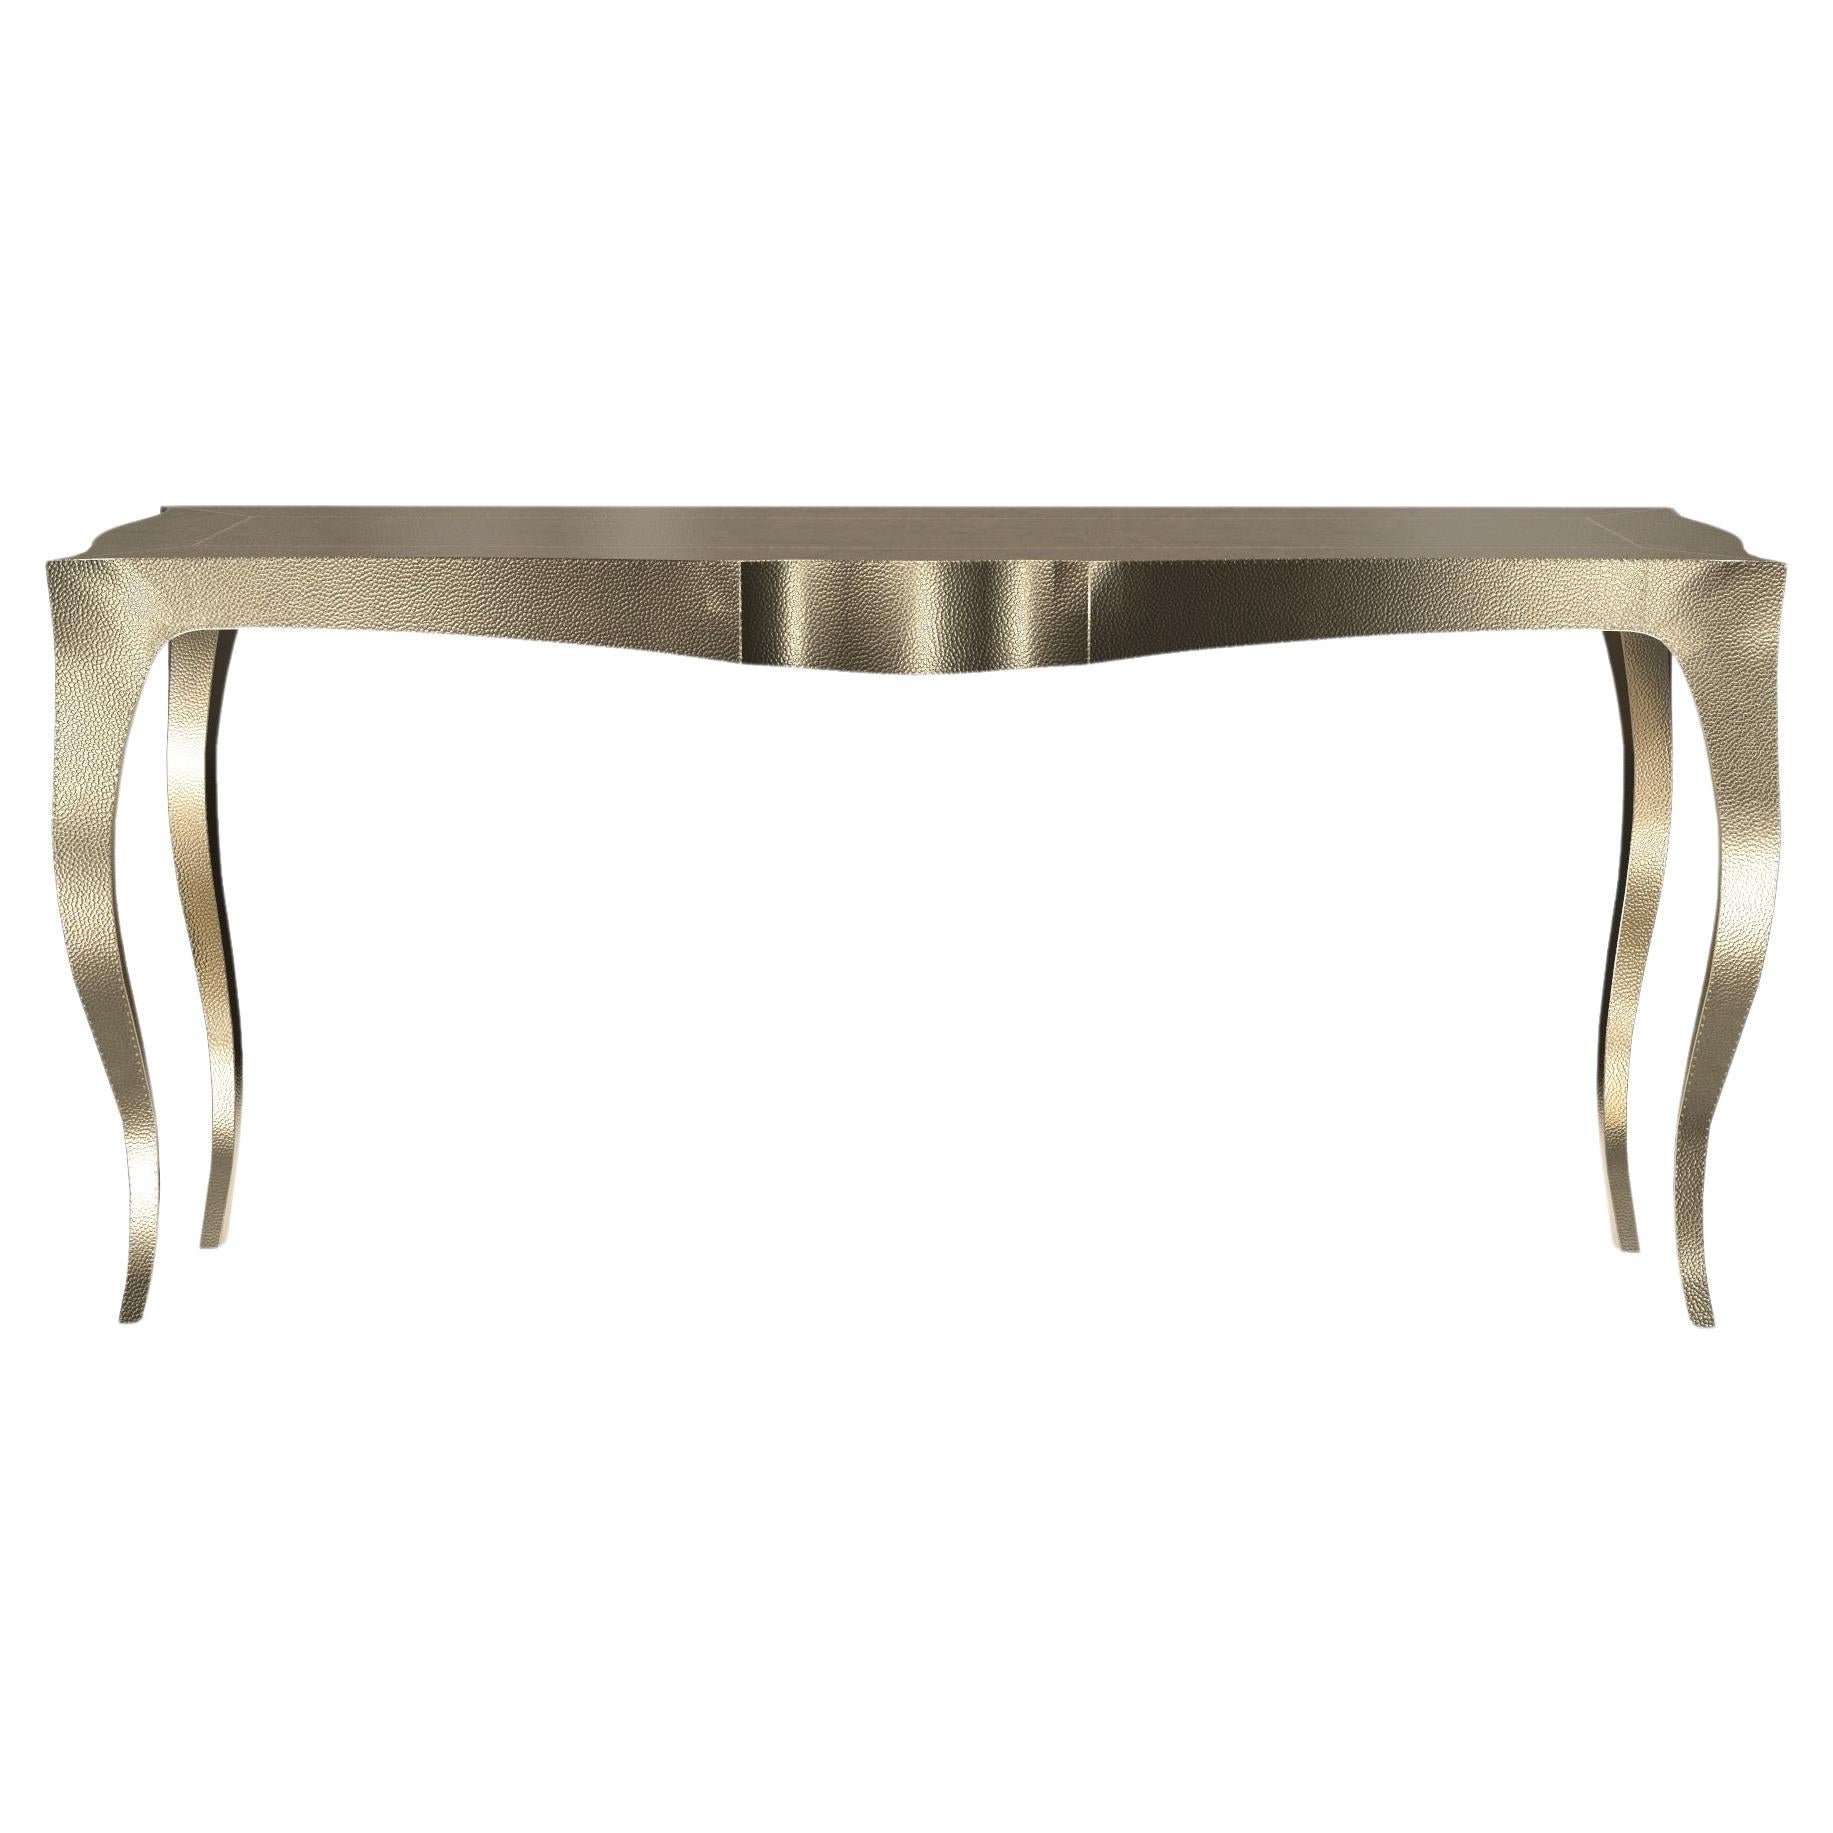 Louise Console Art Deco Conference Tables Mid. Hammered Brass by Paul Mathieu   For Sale